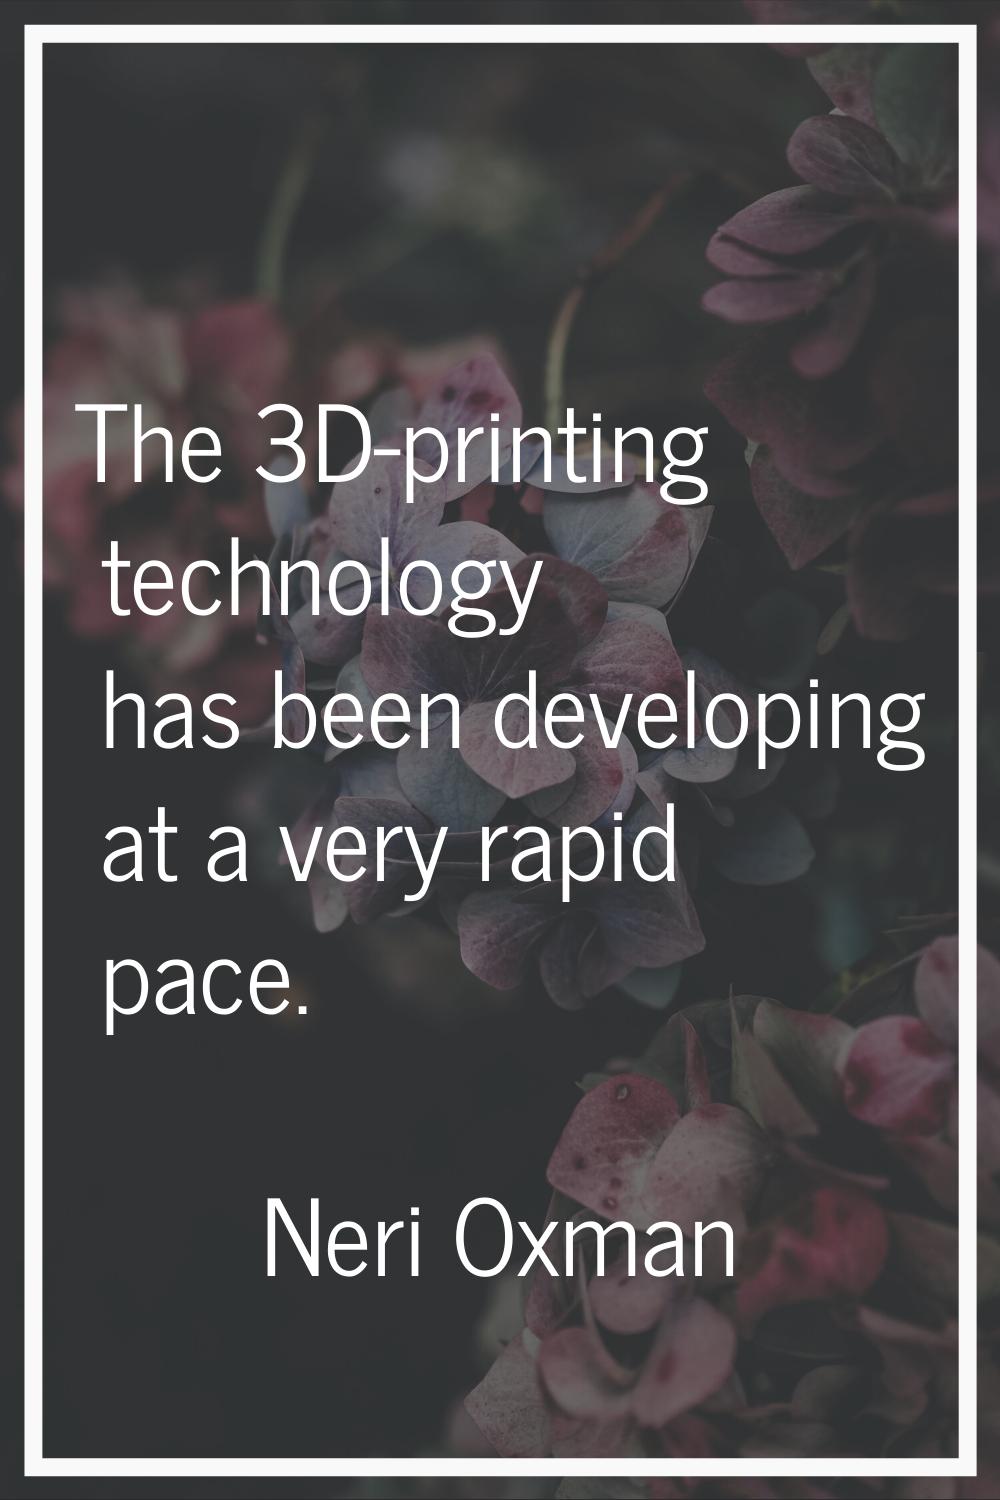 The 3D-printing technology has been developing at a very rapid pace.